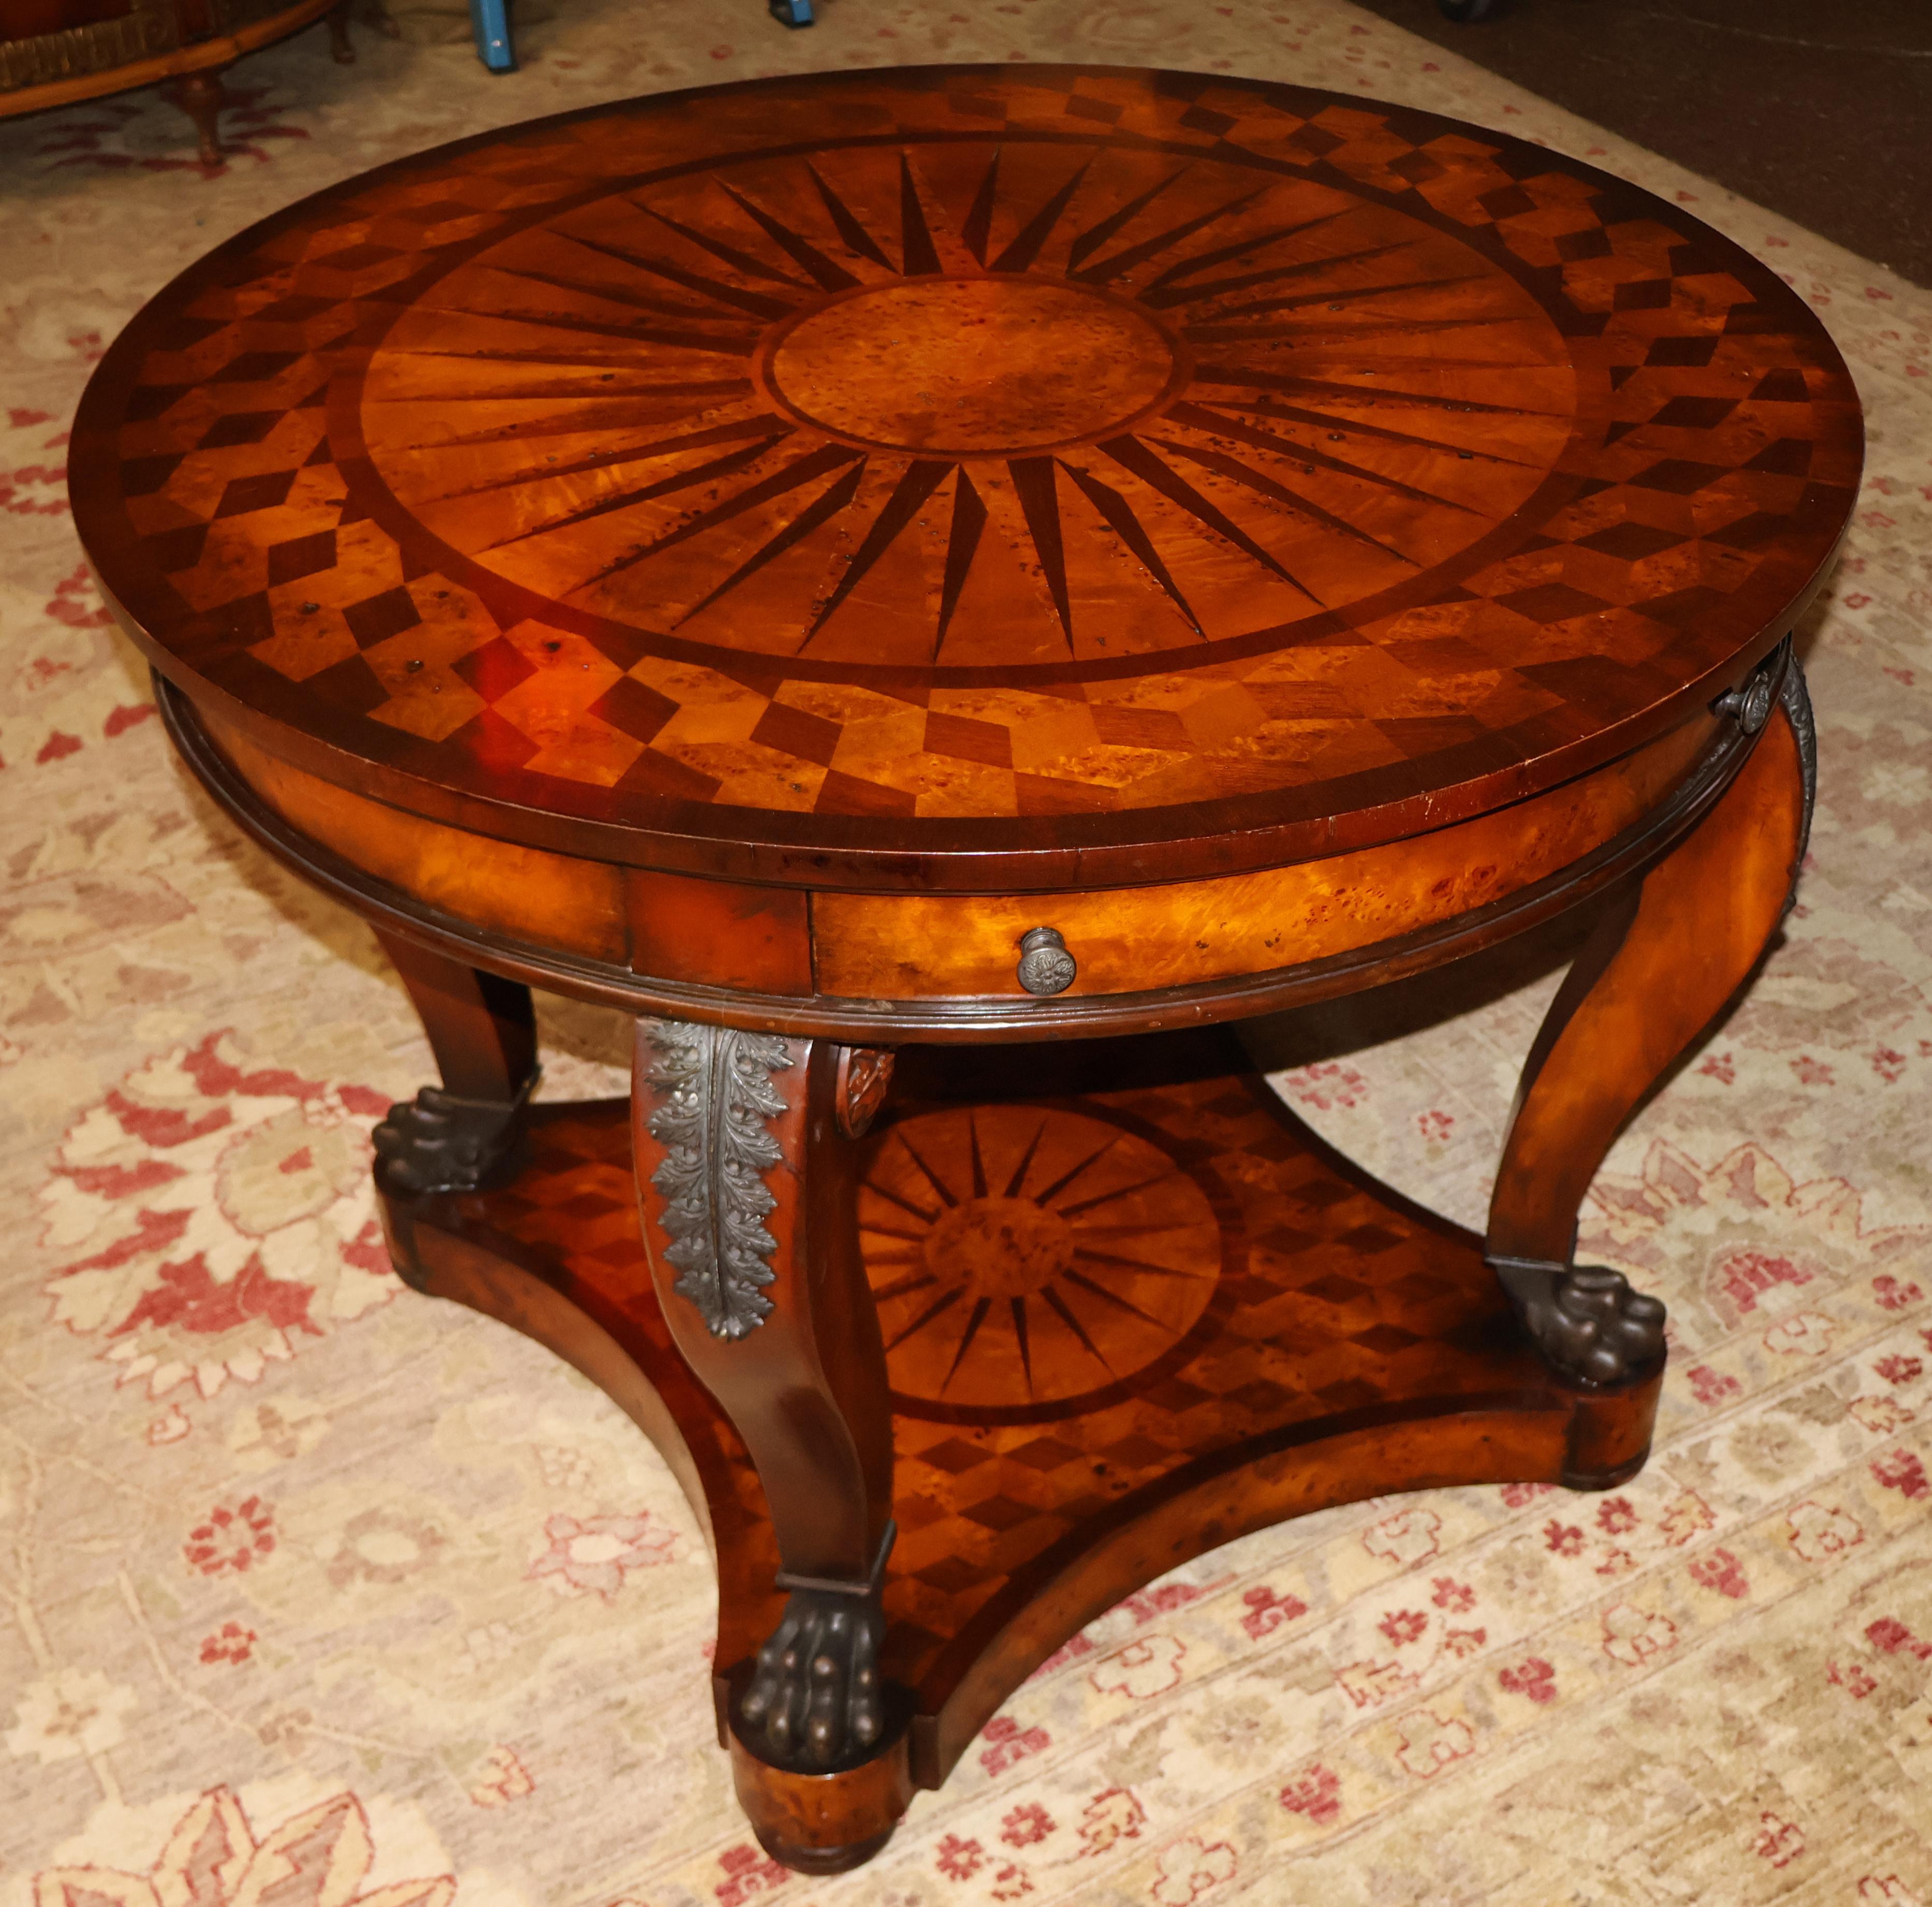 ​Vintage Theodore Alexander Bronze Mounted Burled Walnut Inlaid Center Table

Dimensions : 29.5